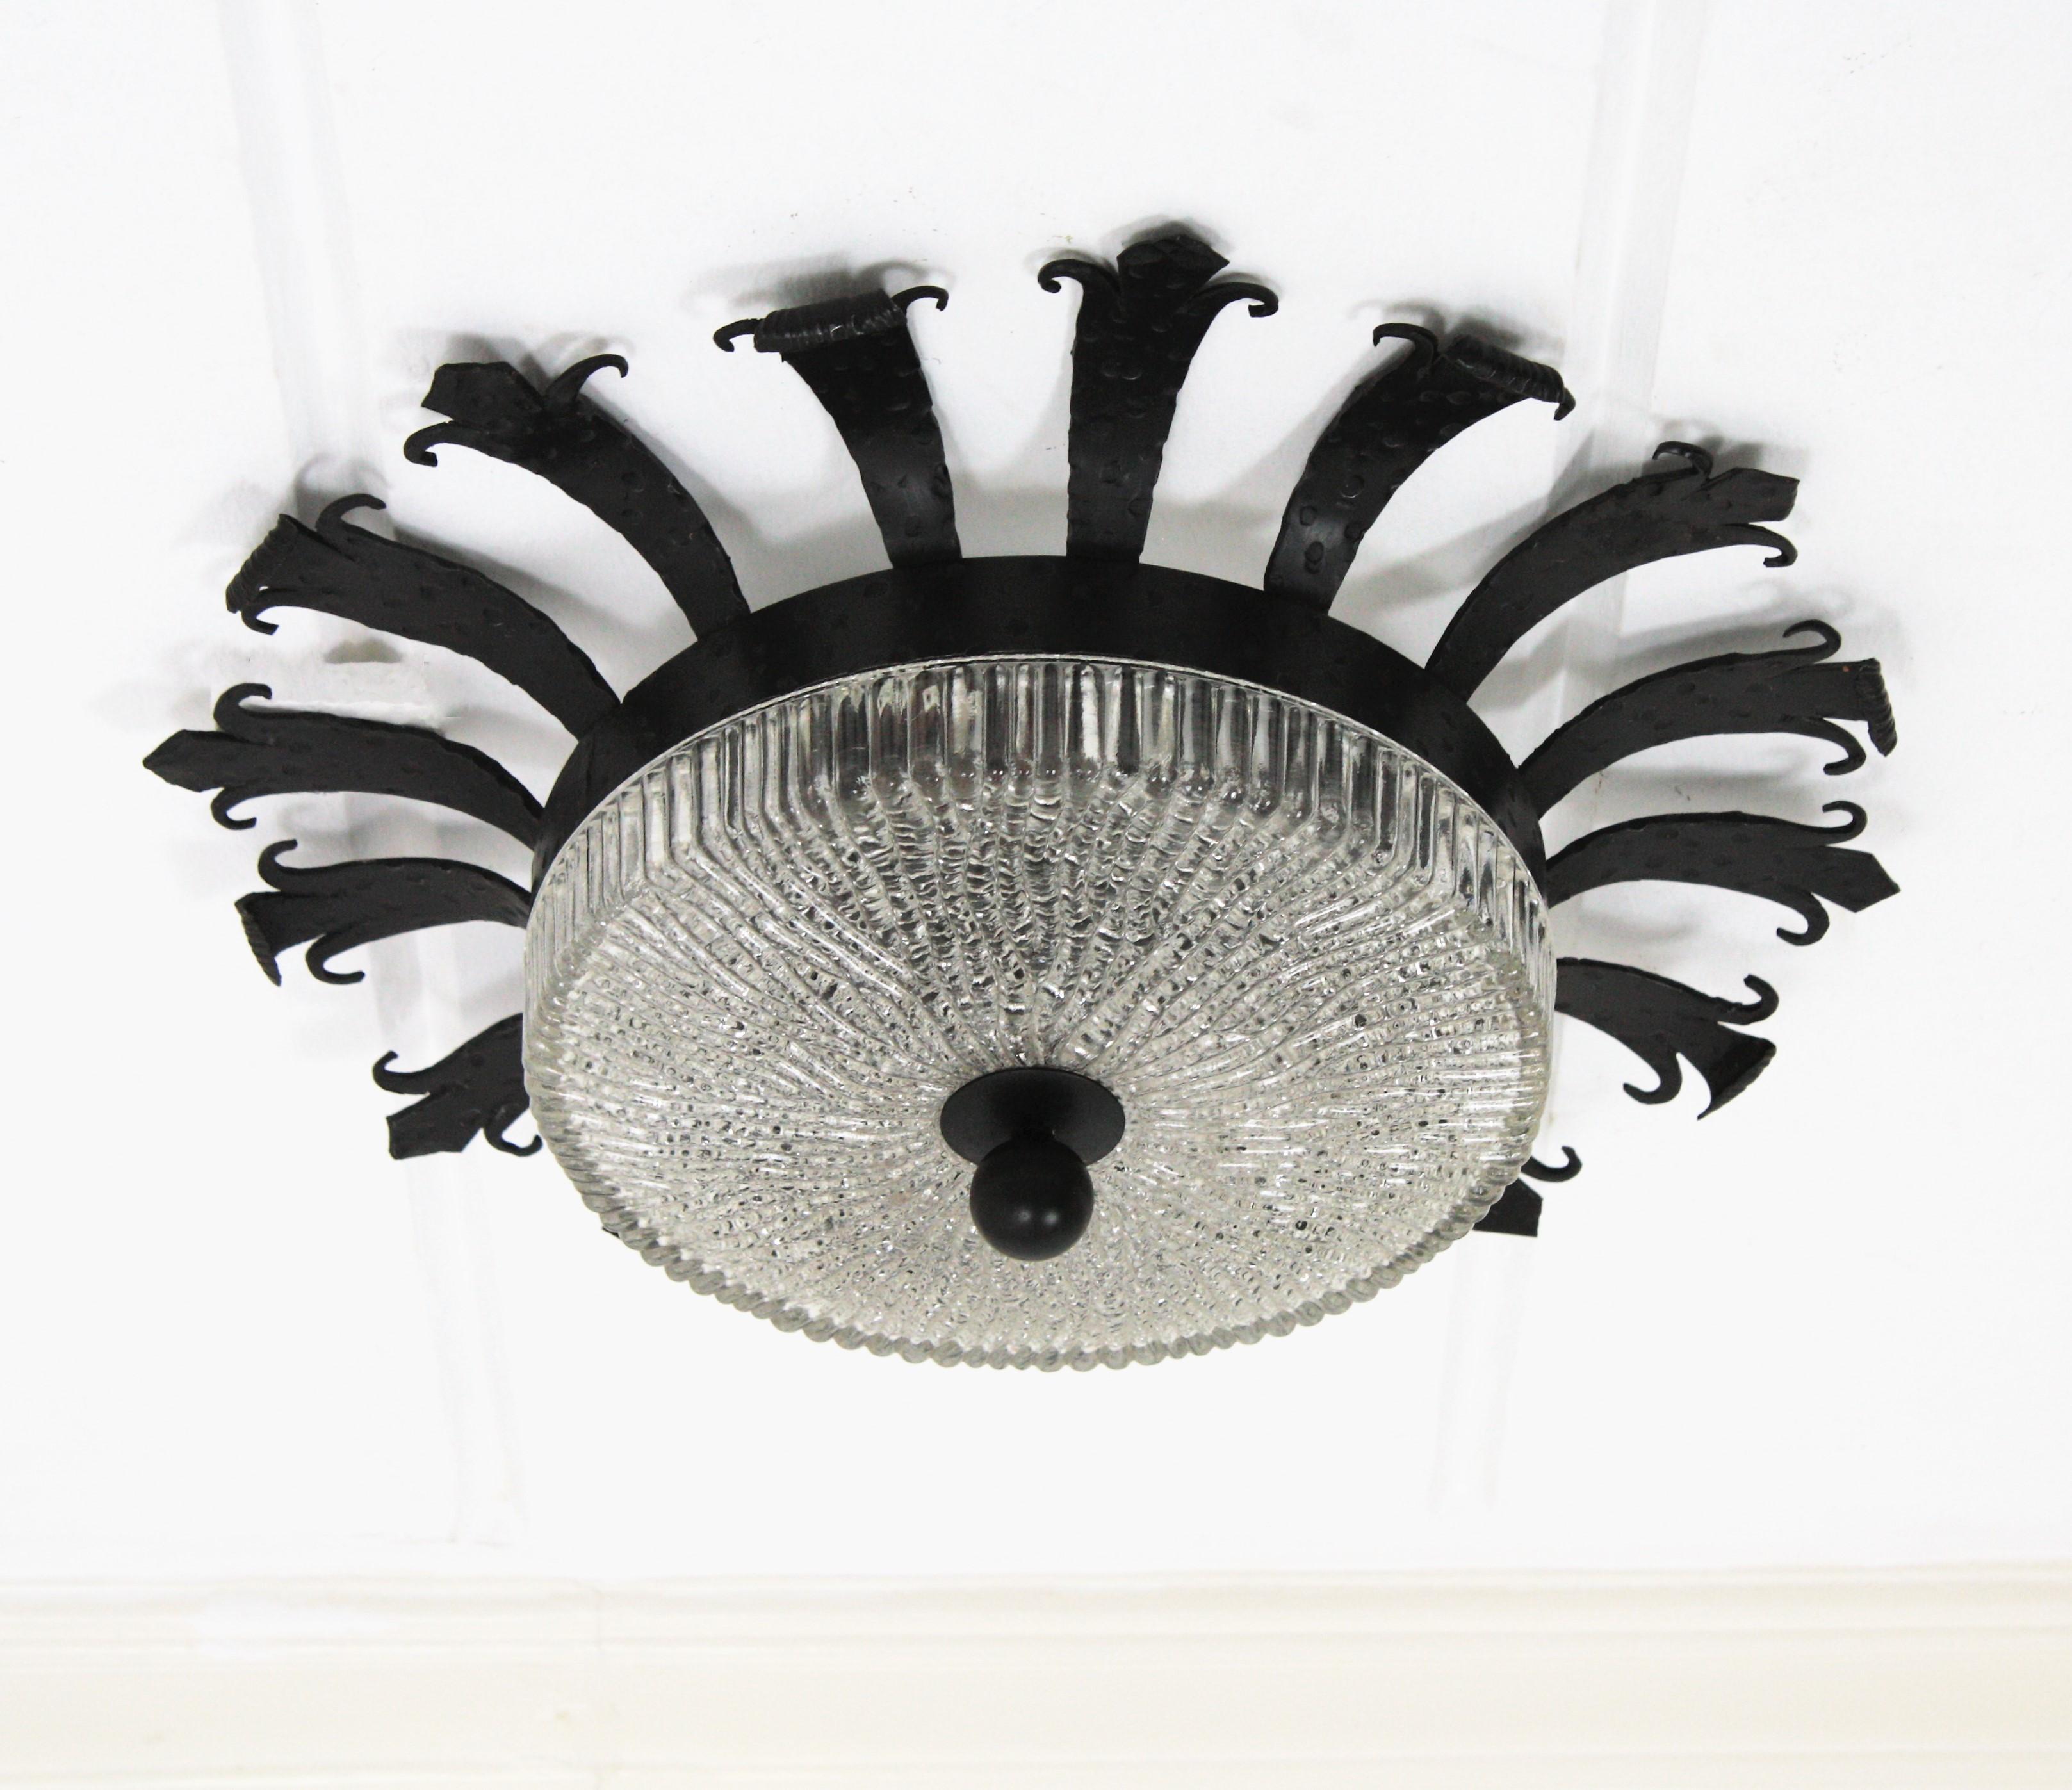 20th Century Sunburst Crown Flush Mounts or Wall Lights in Wrought Iron and Glass, Pair